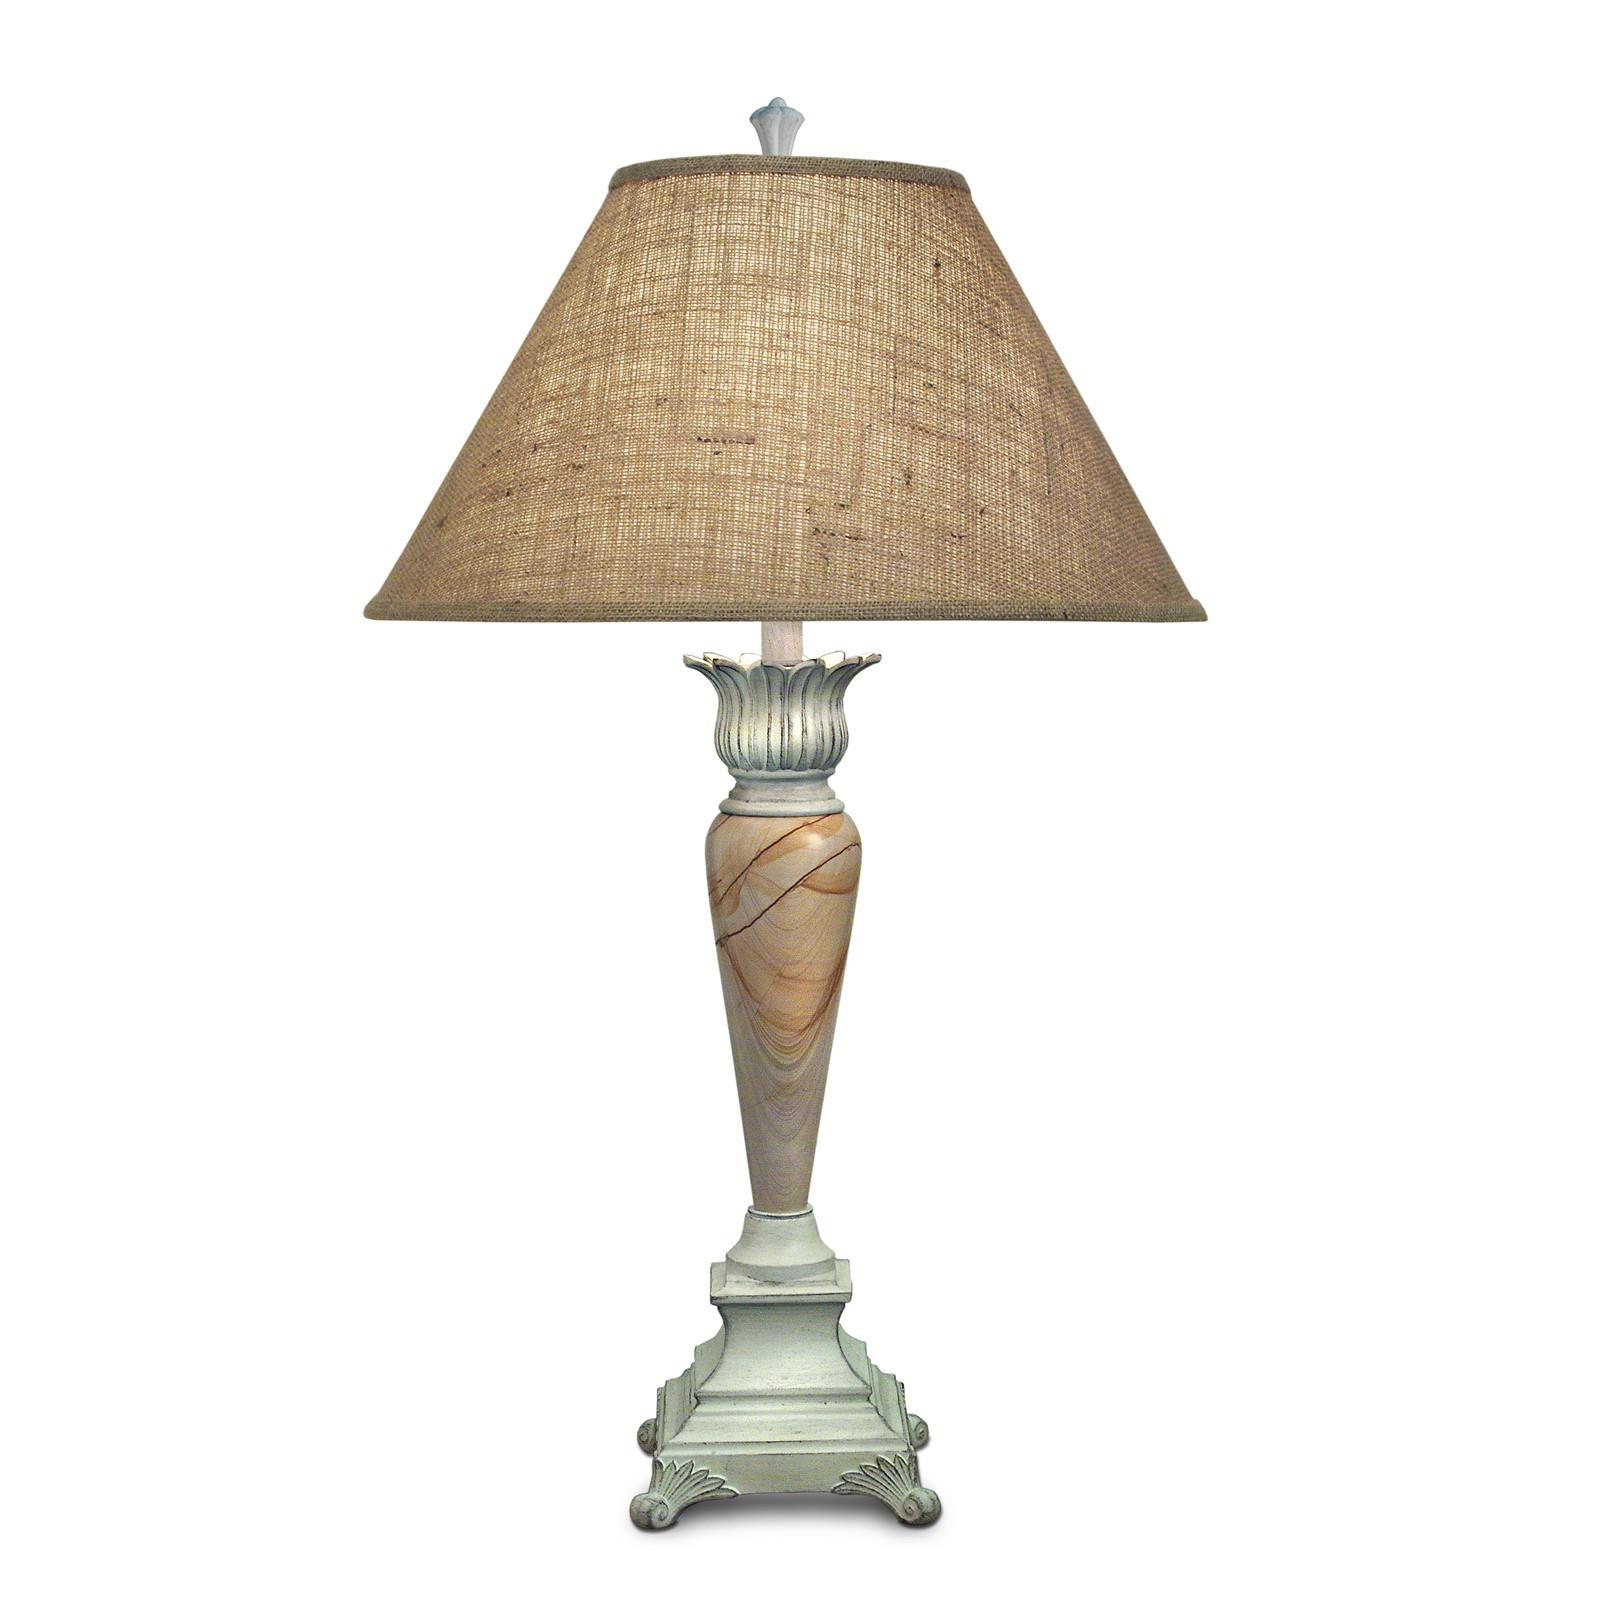 Distressed White Table Lamp